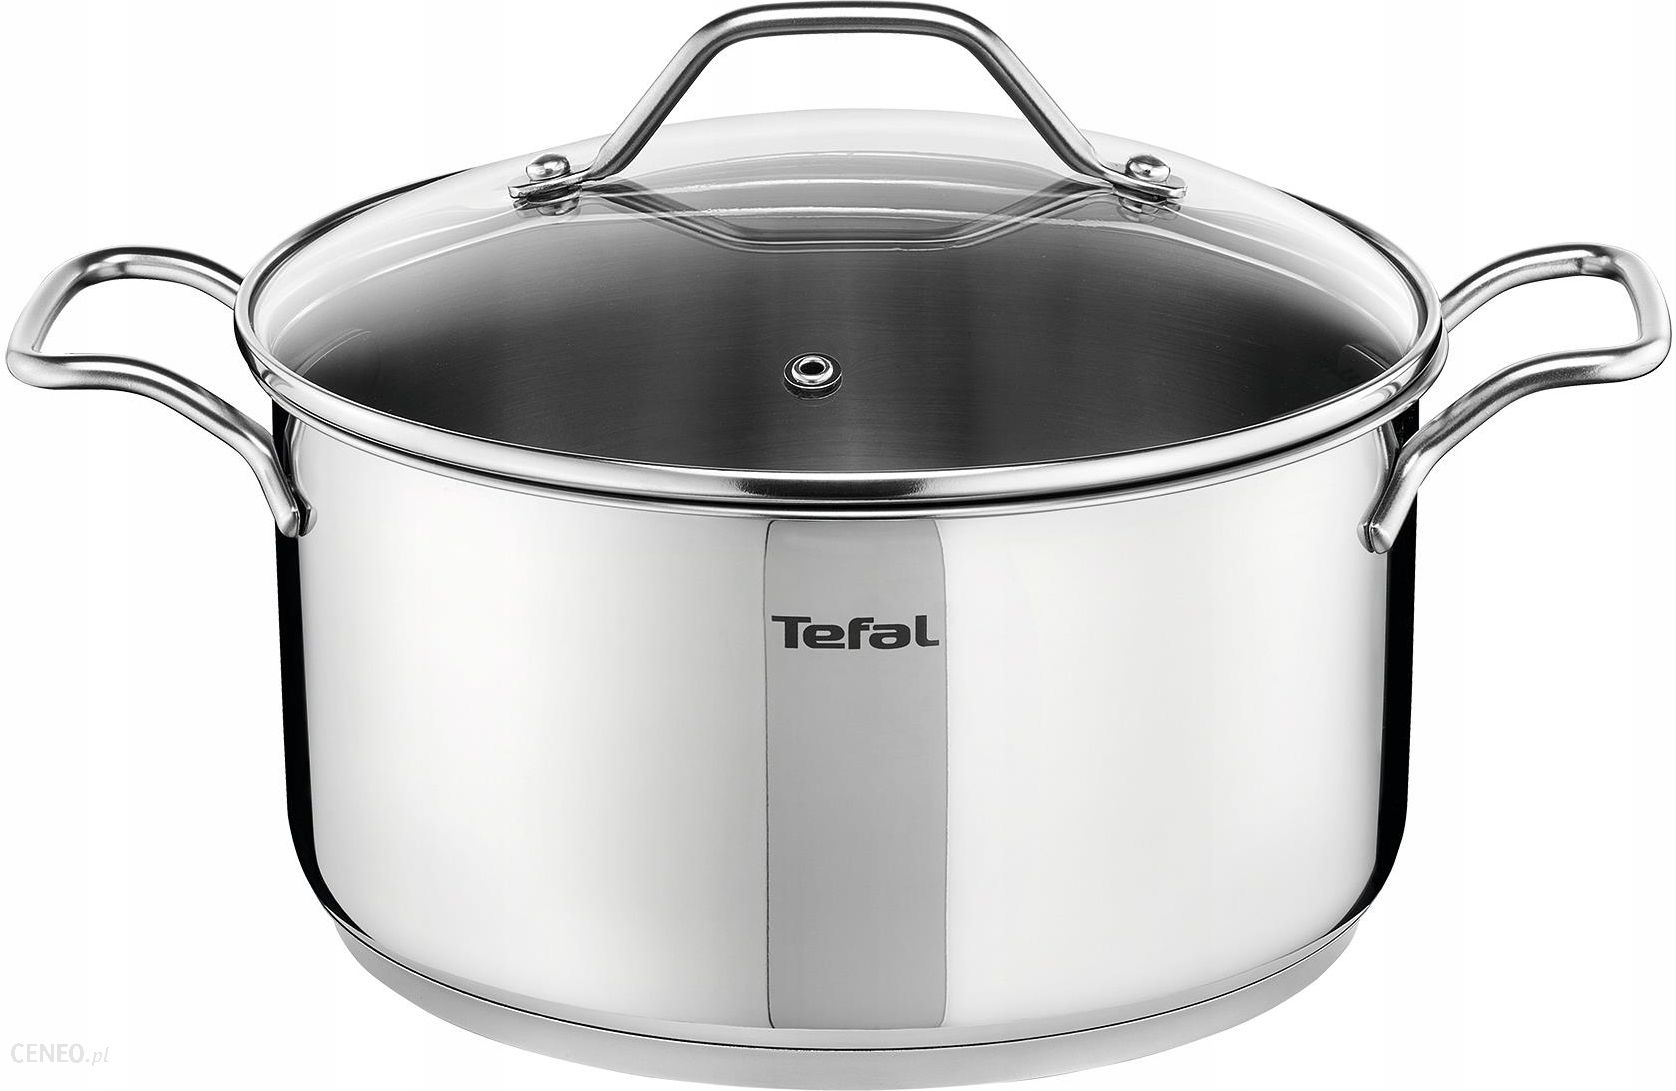  Tefal Intuition 22 cm INOX A7027984